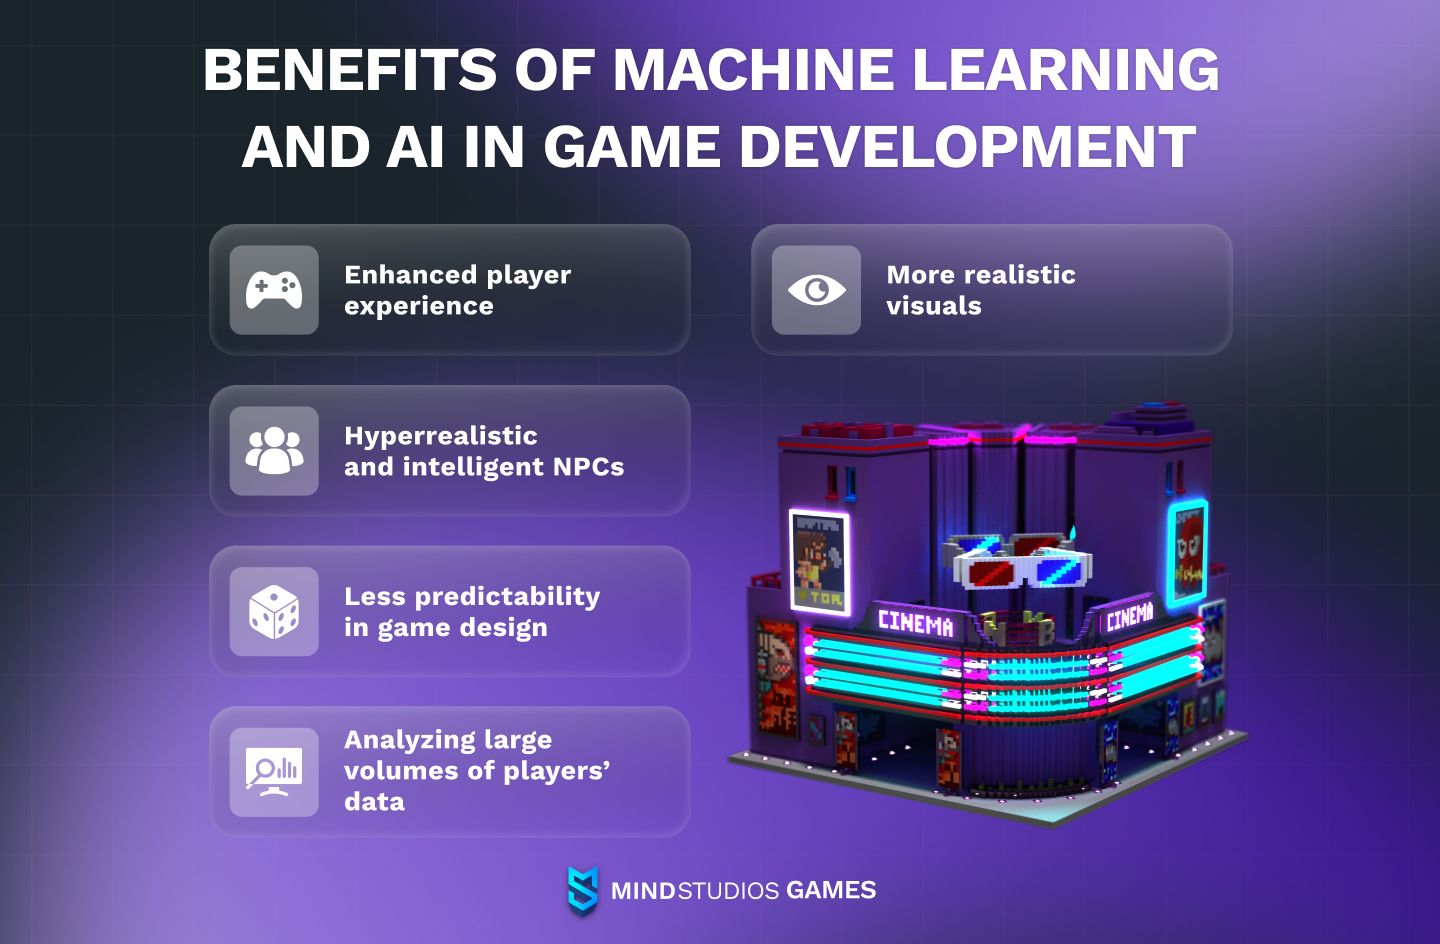 Benefits of machine learning and AI in game development